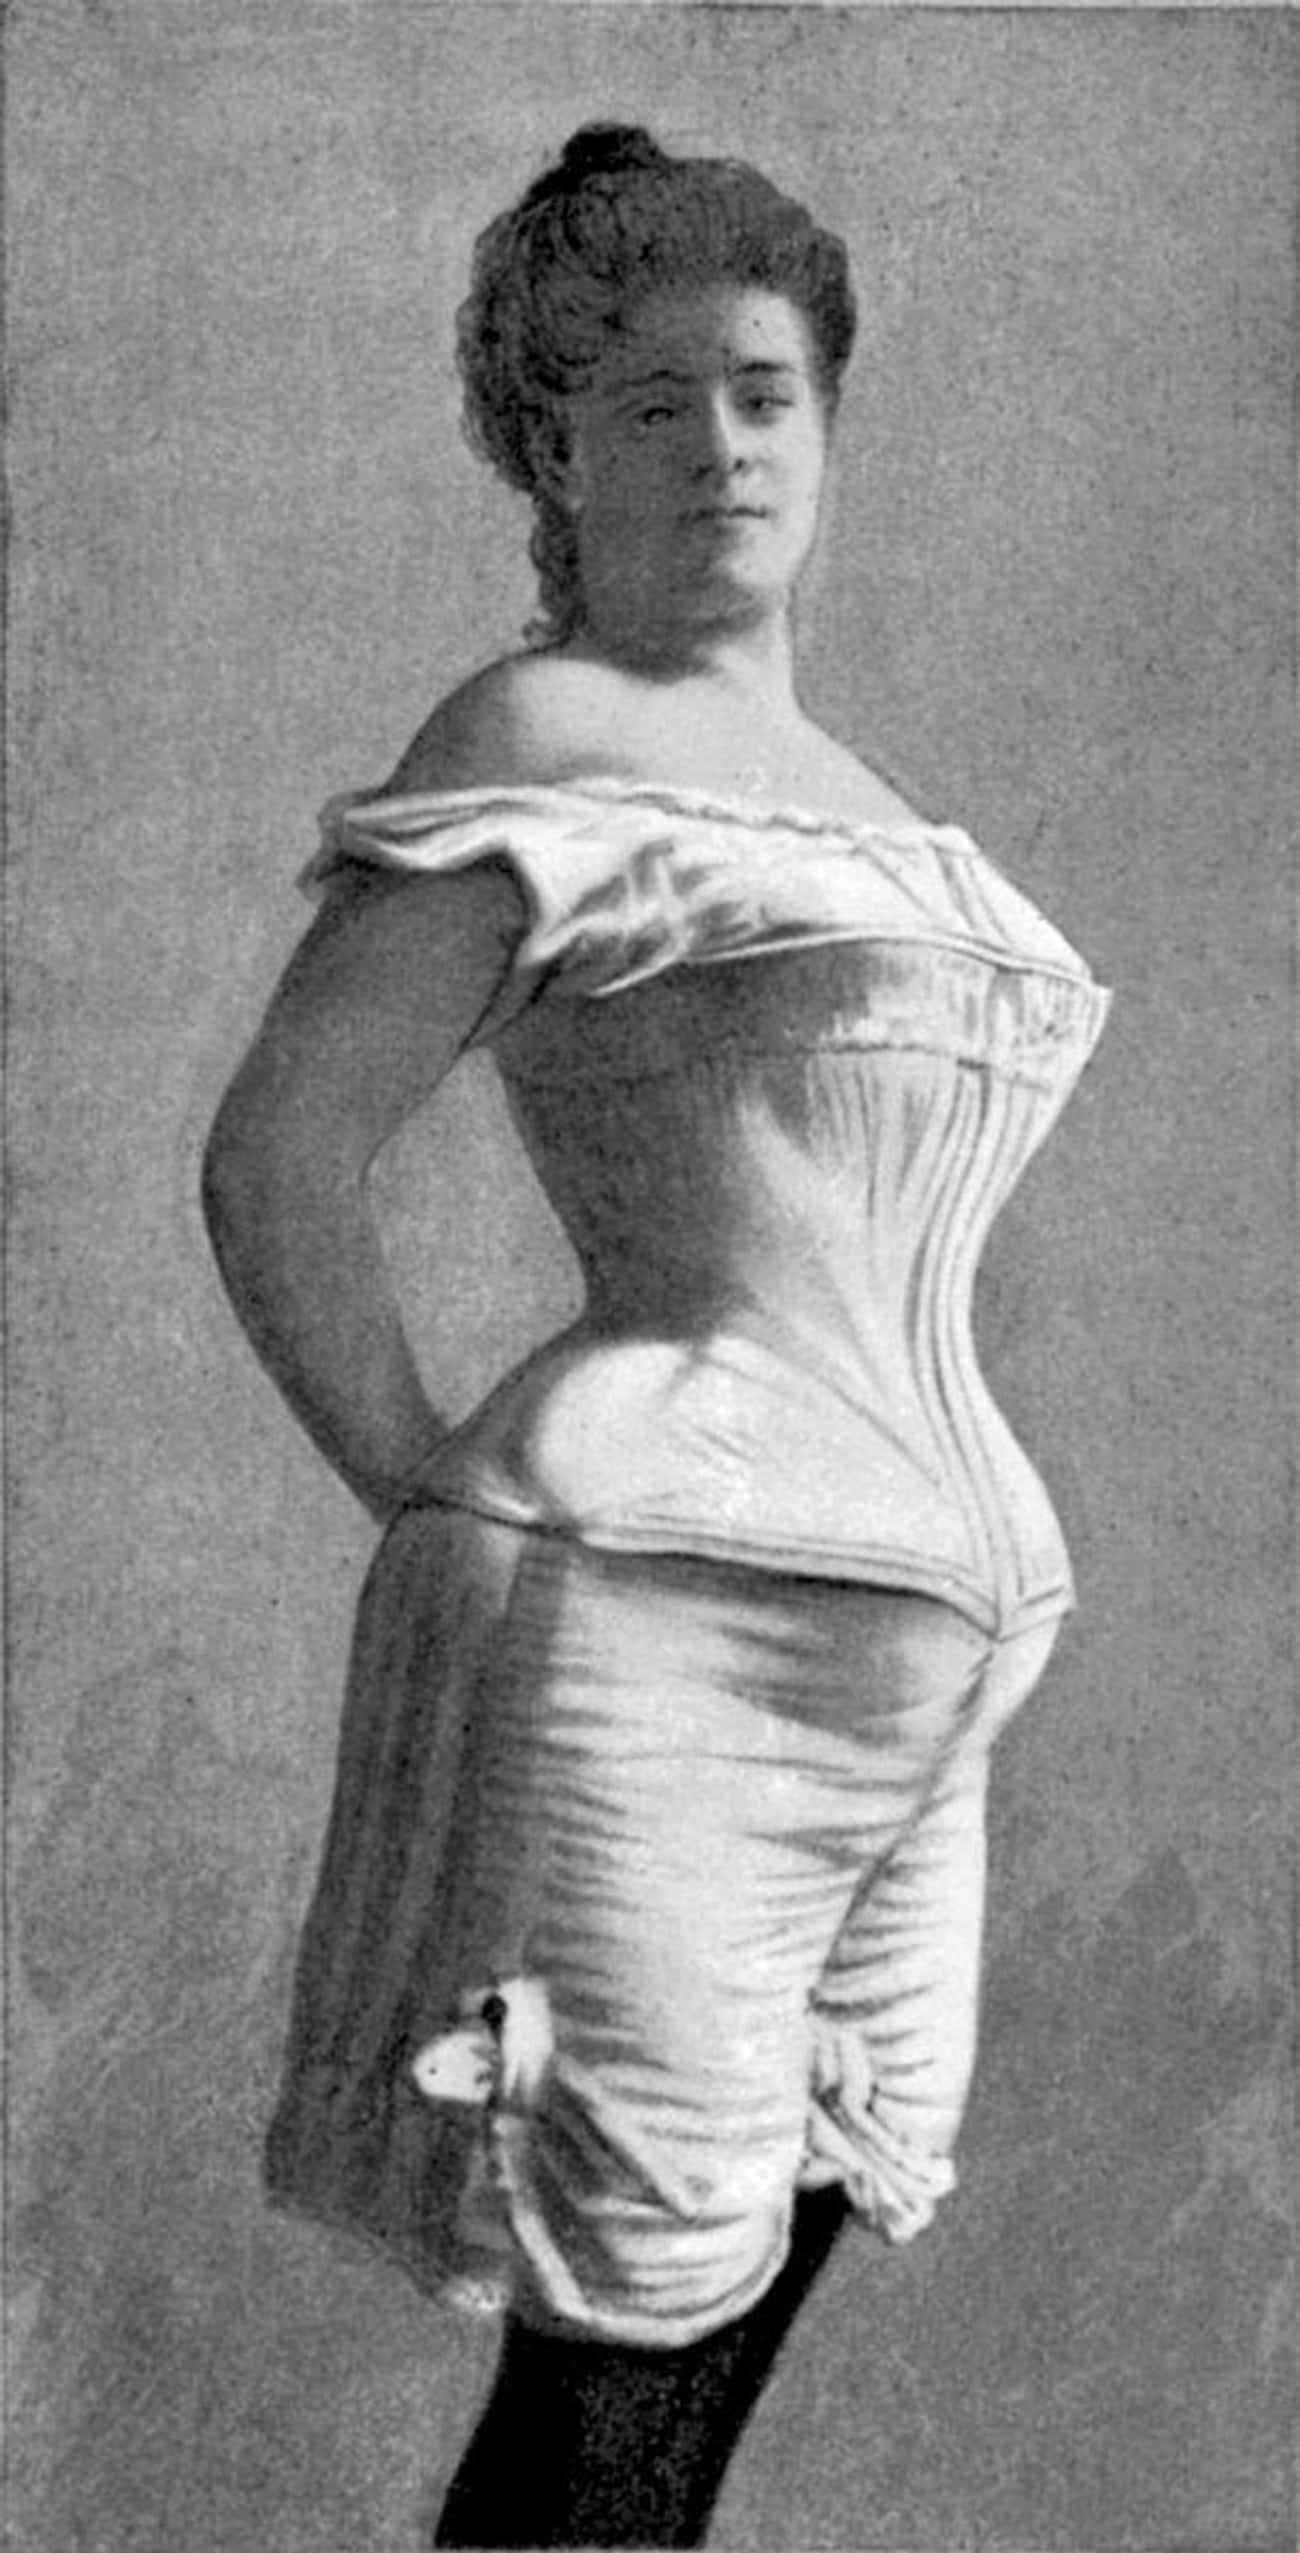 Long Skirts And Tight Corsets Were Blamed For The Spread Of Tuberculosis